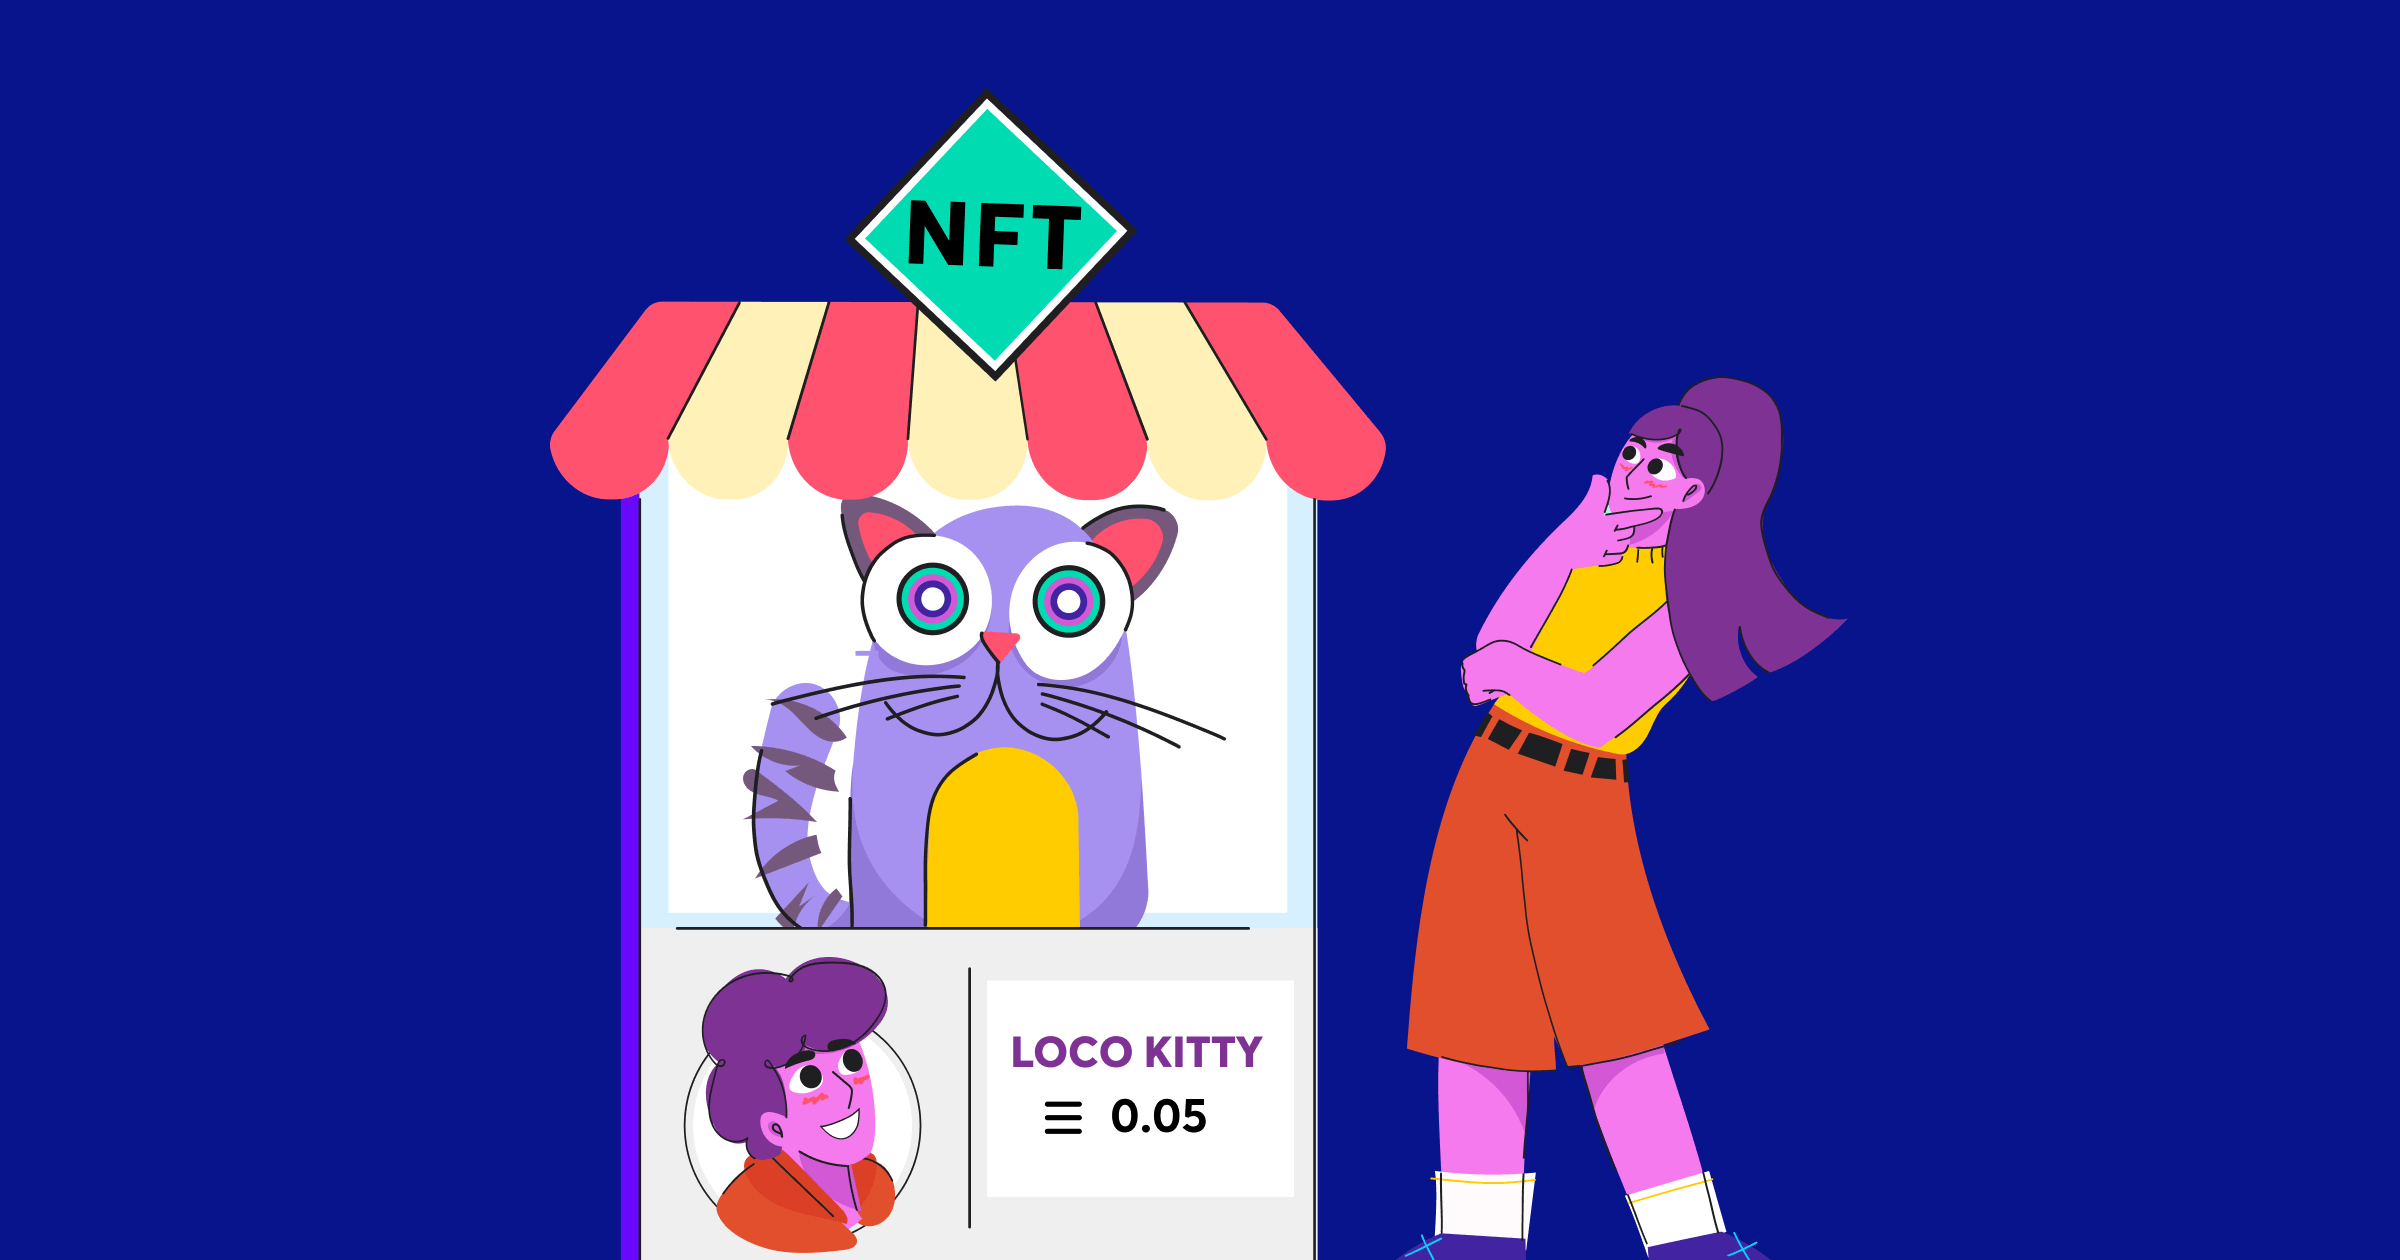 Top 10 NFT Marketplaces To Buy NFTs